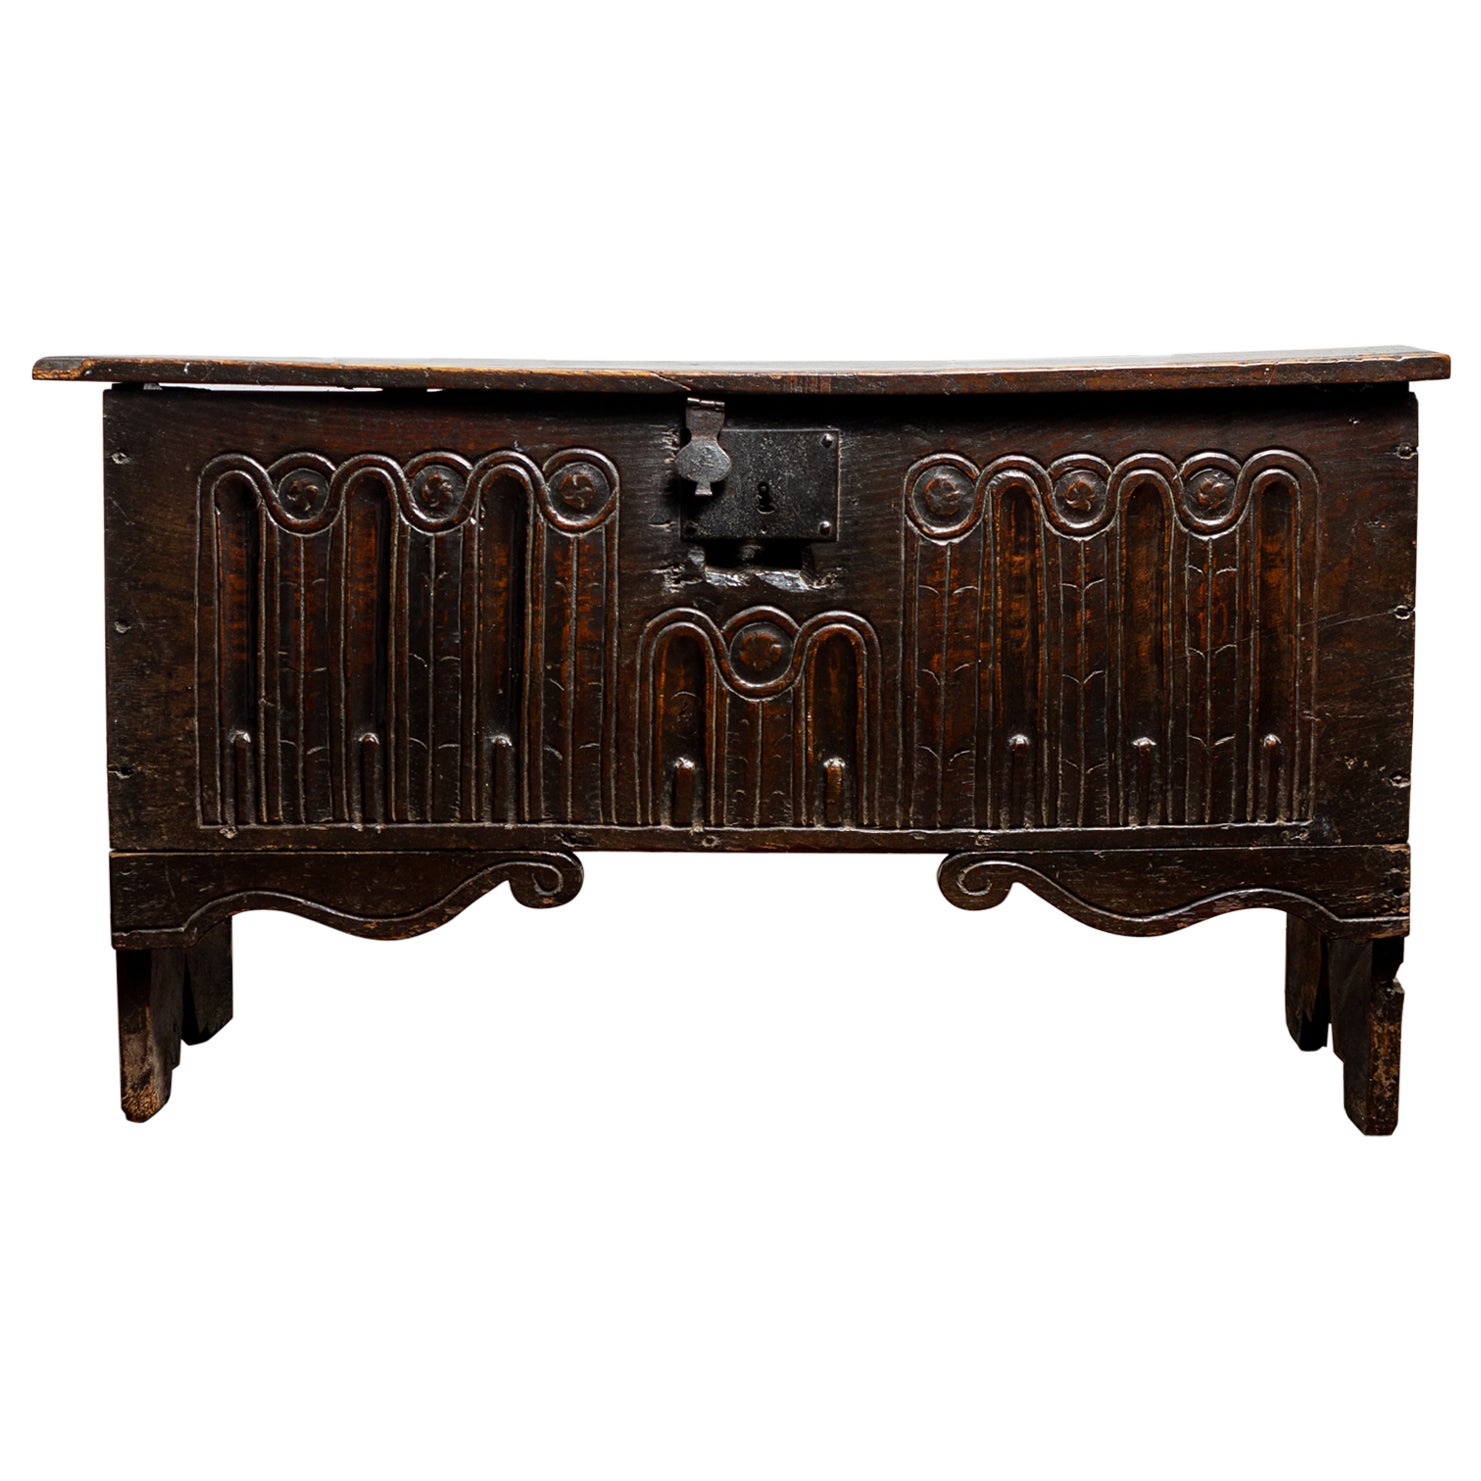 17th Century, James I, Carved Boarded Oak Chest, England, Circa 1603 - 1625 For Sale